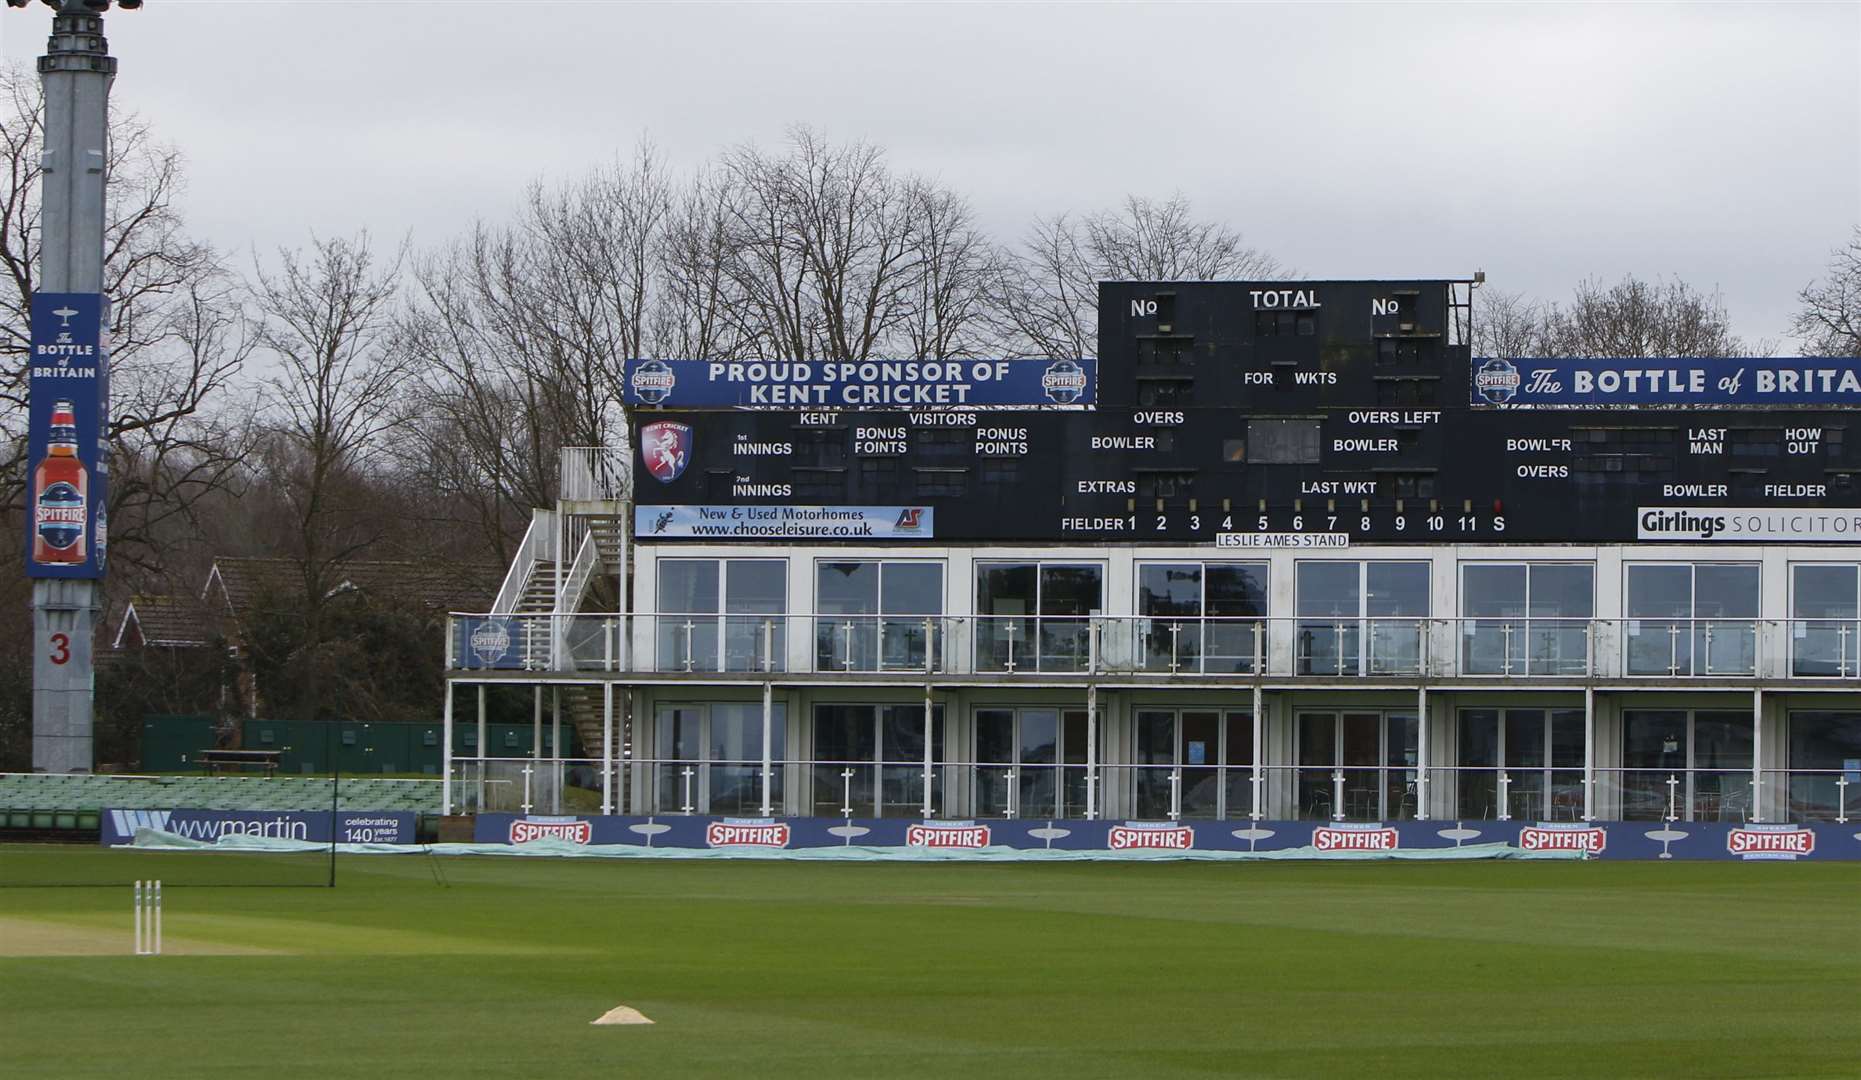 The ECB have recommended that all recreational cricket is suspended